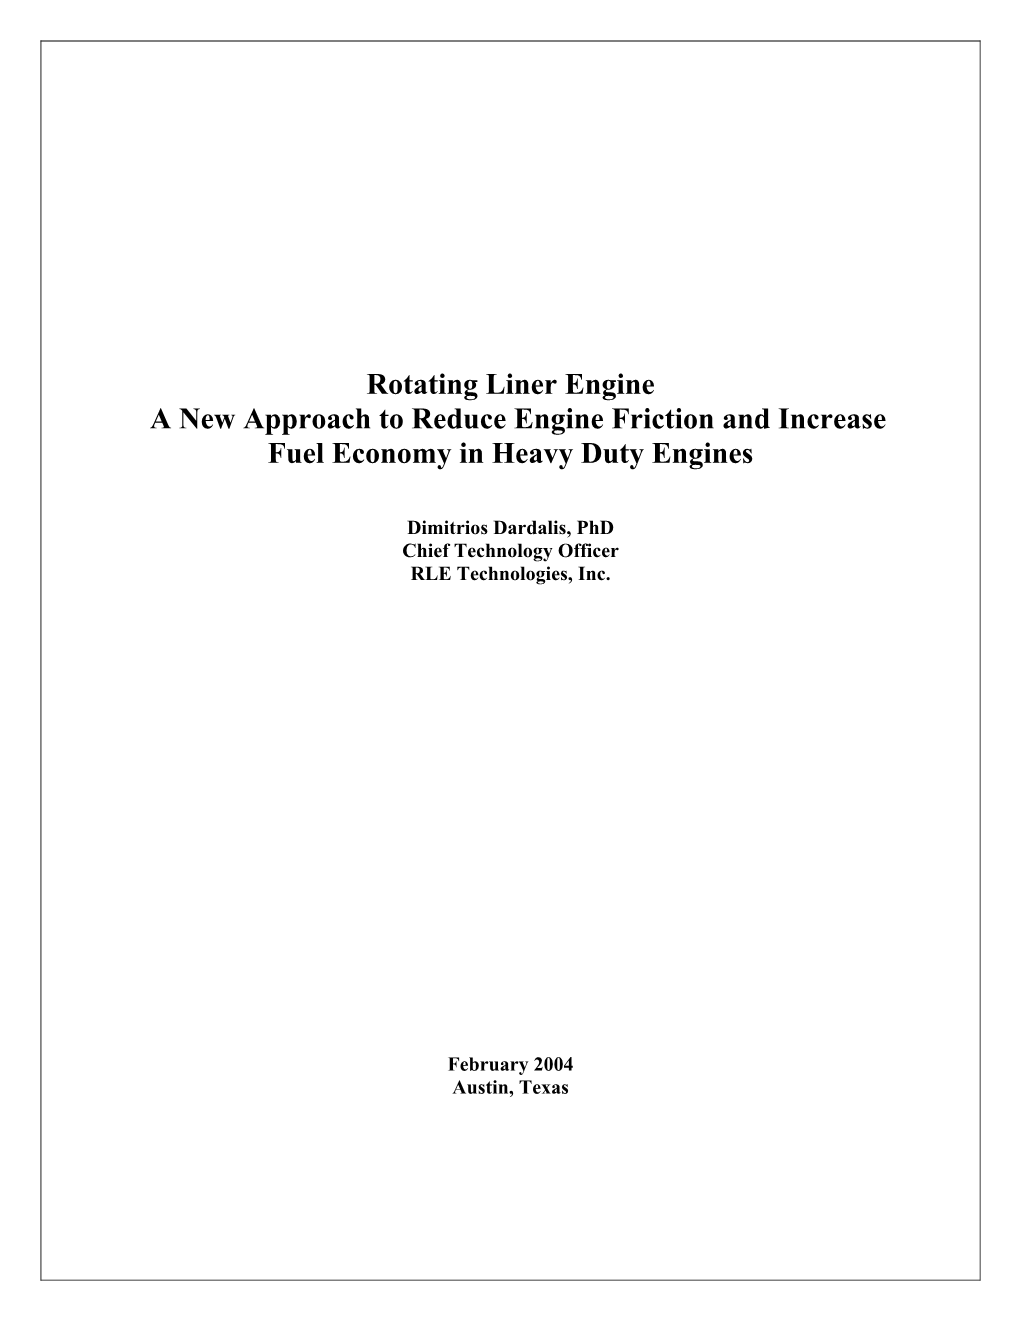 Rotating Liner Engine a New Approach to Reduce Engine Friction and Increase Fuel Economy in Heavy Duty Engines